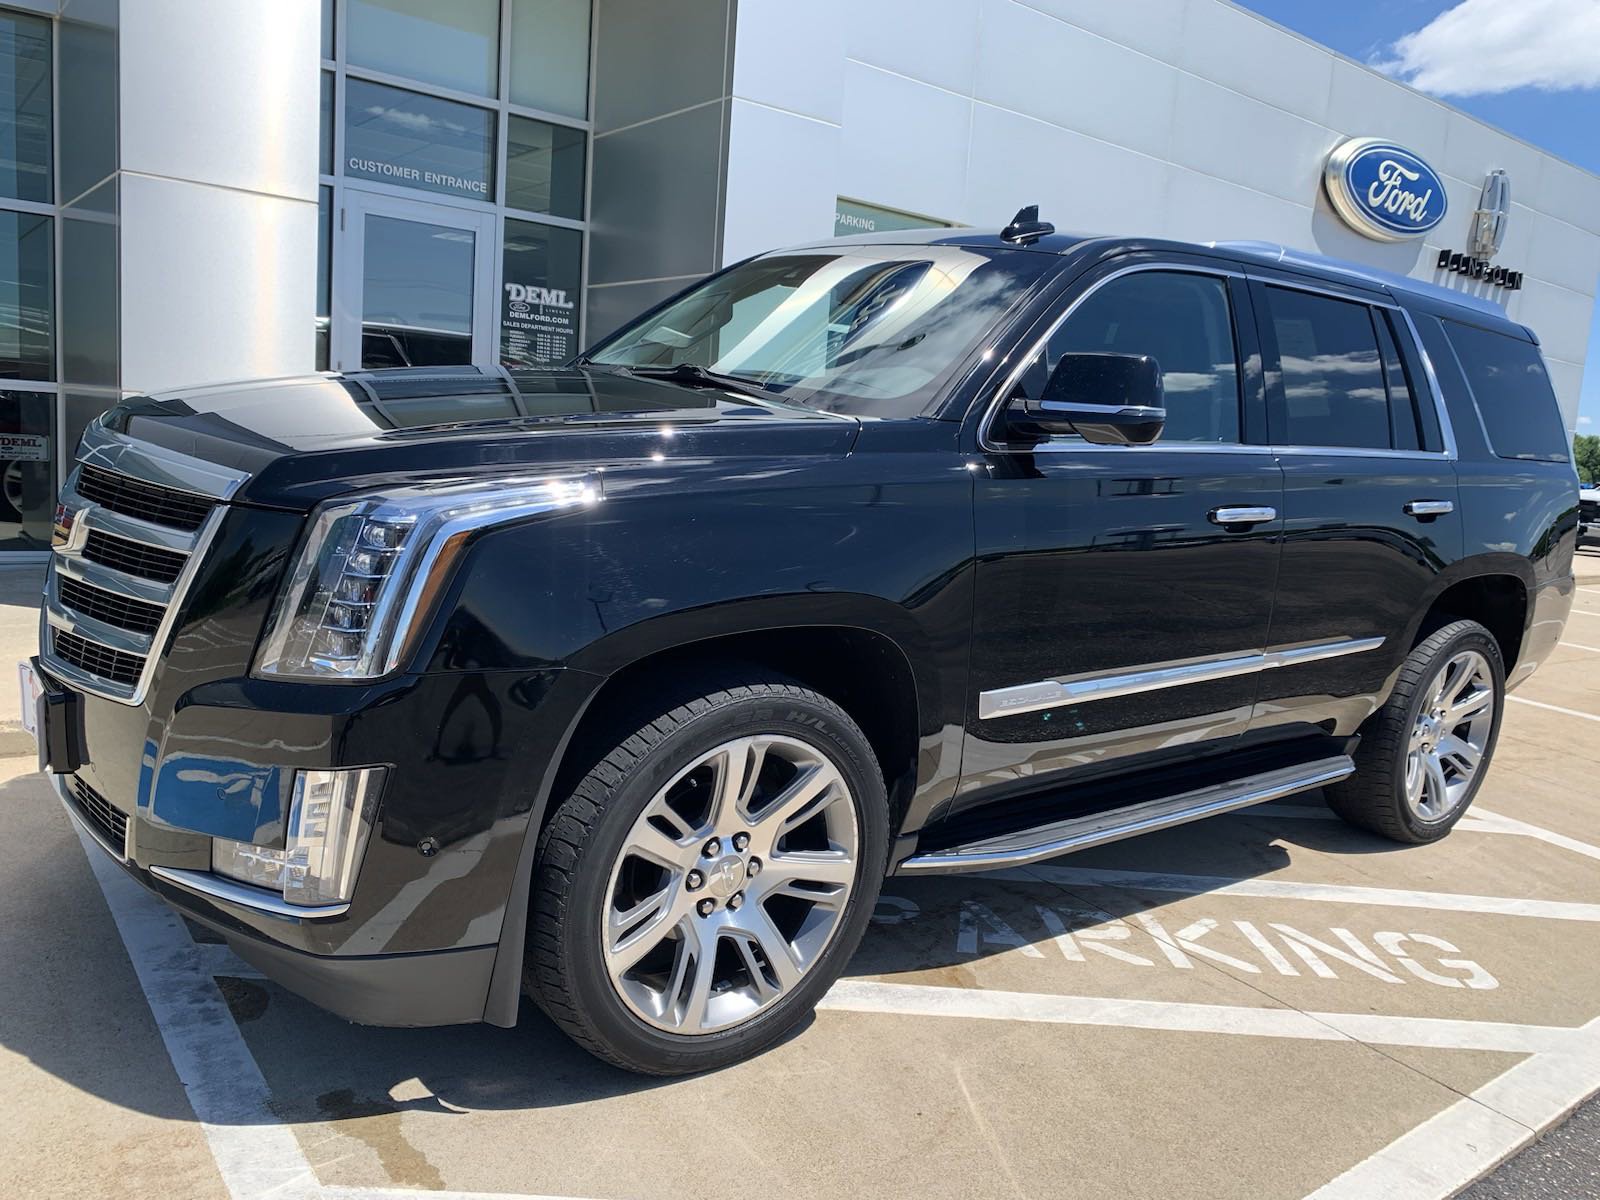 Used 2018 Cadillac Escalade Premium Luxury with VIN 1GYS4CKJ0JR156874 for sale in Waseca, Minnesota